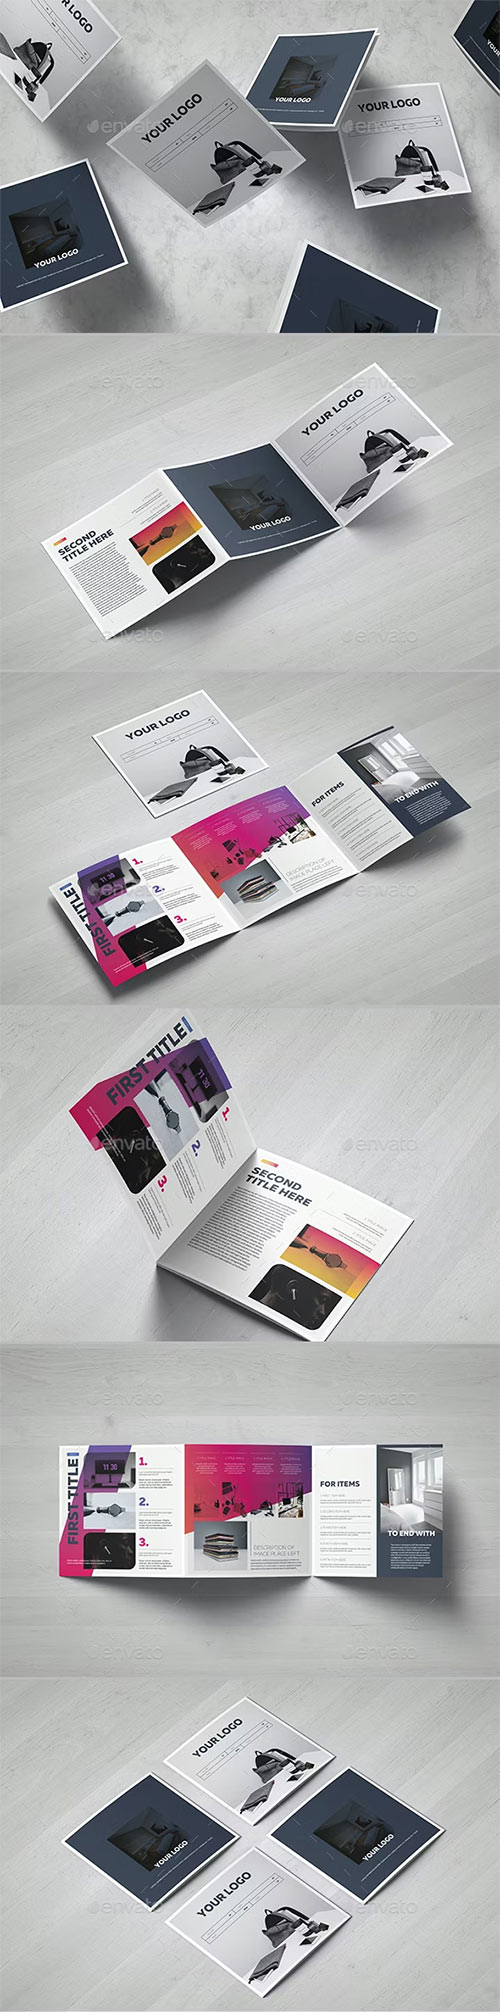 Gradient Square Trifold Template 17977672